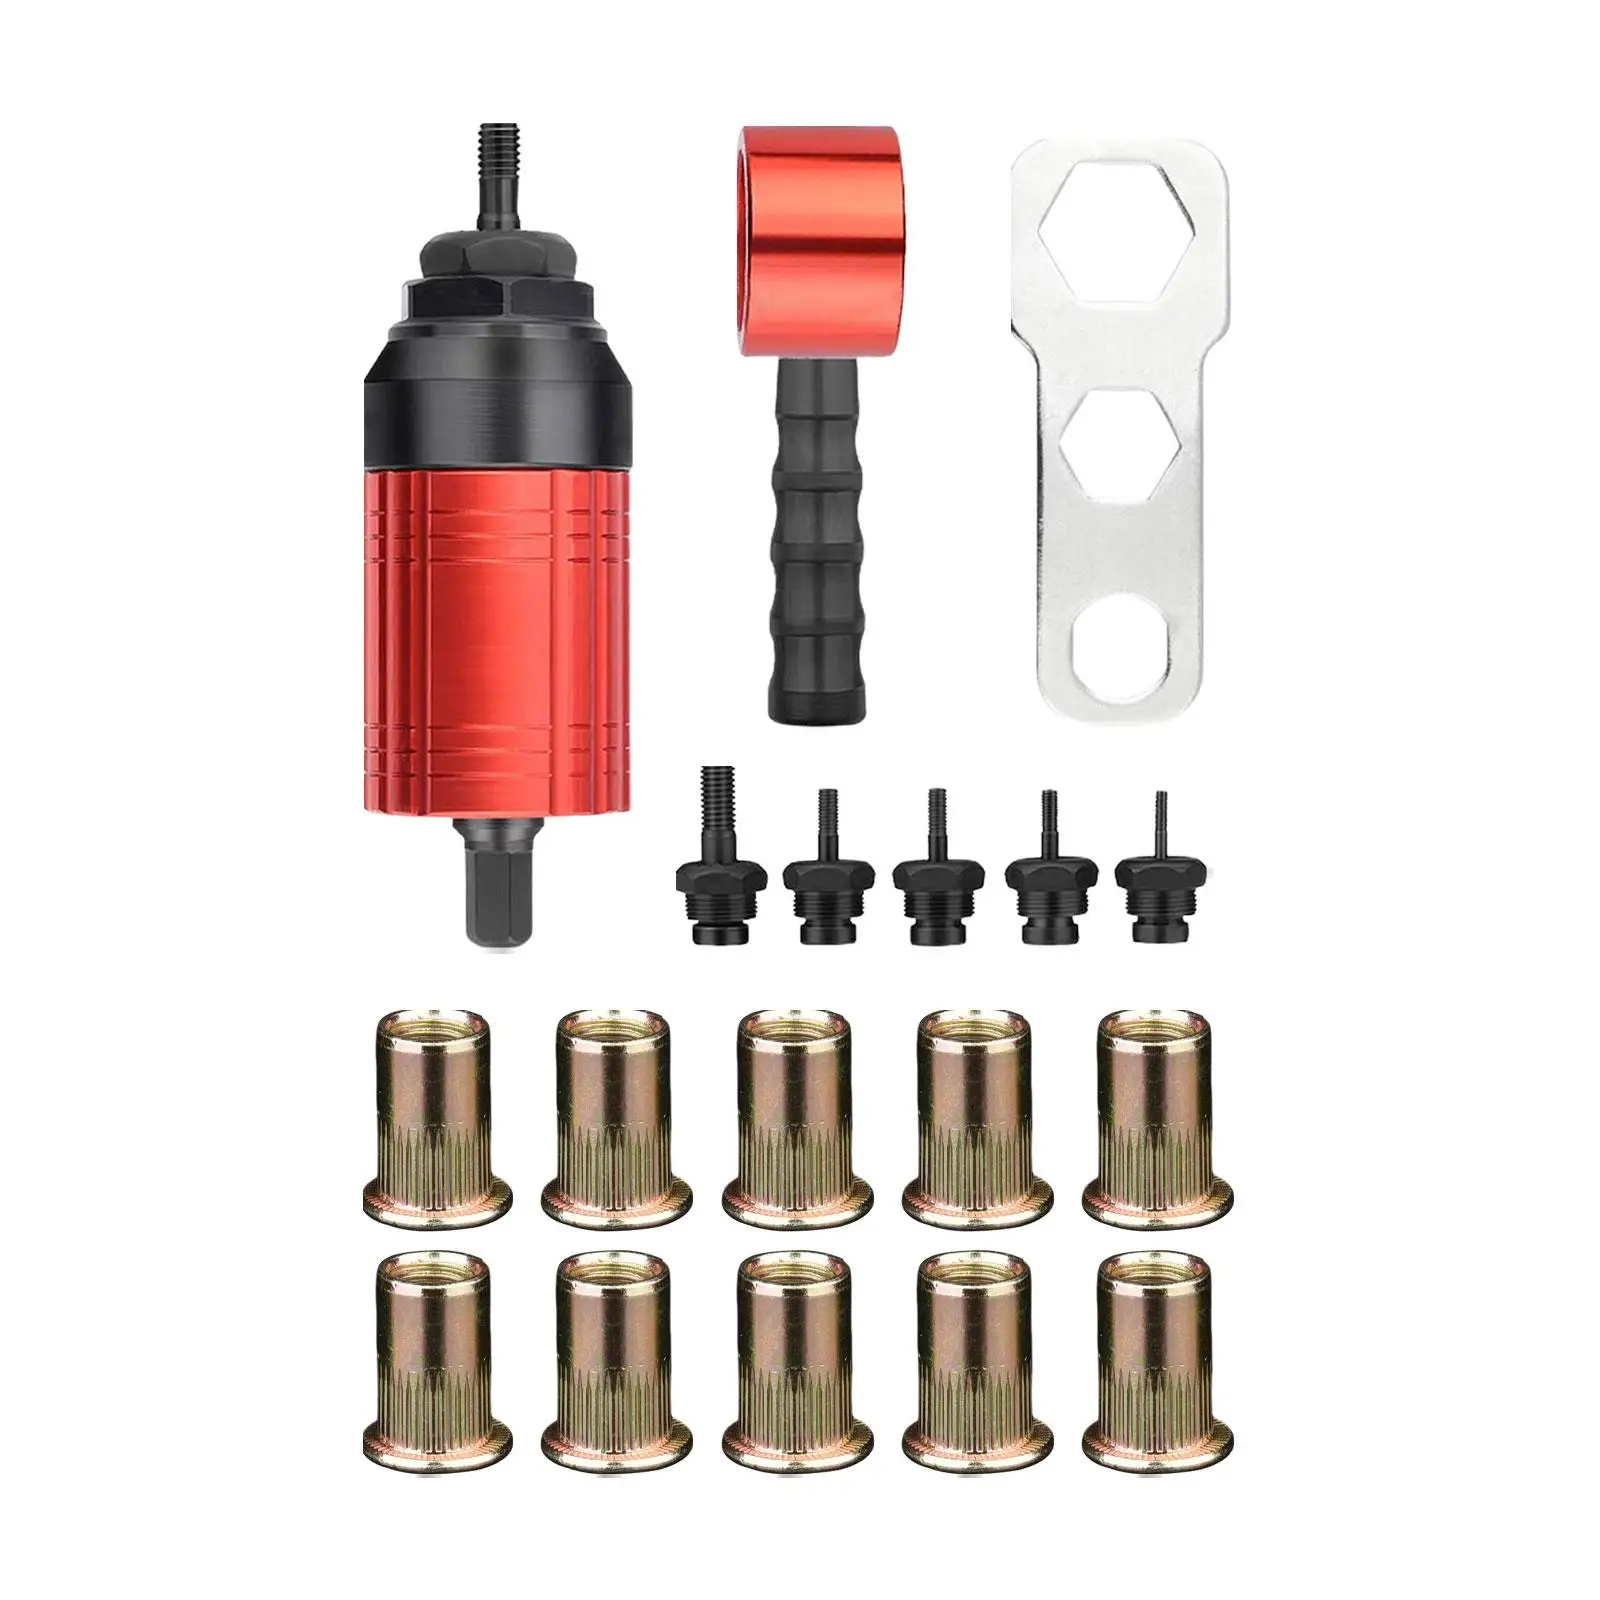 Rivet Nut Drill Adaptor Heavy Duty Threaded Insert Installation Tool for Ship Furniture Architecture Repair Electrical Appliance